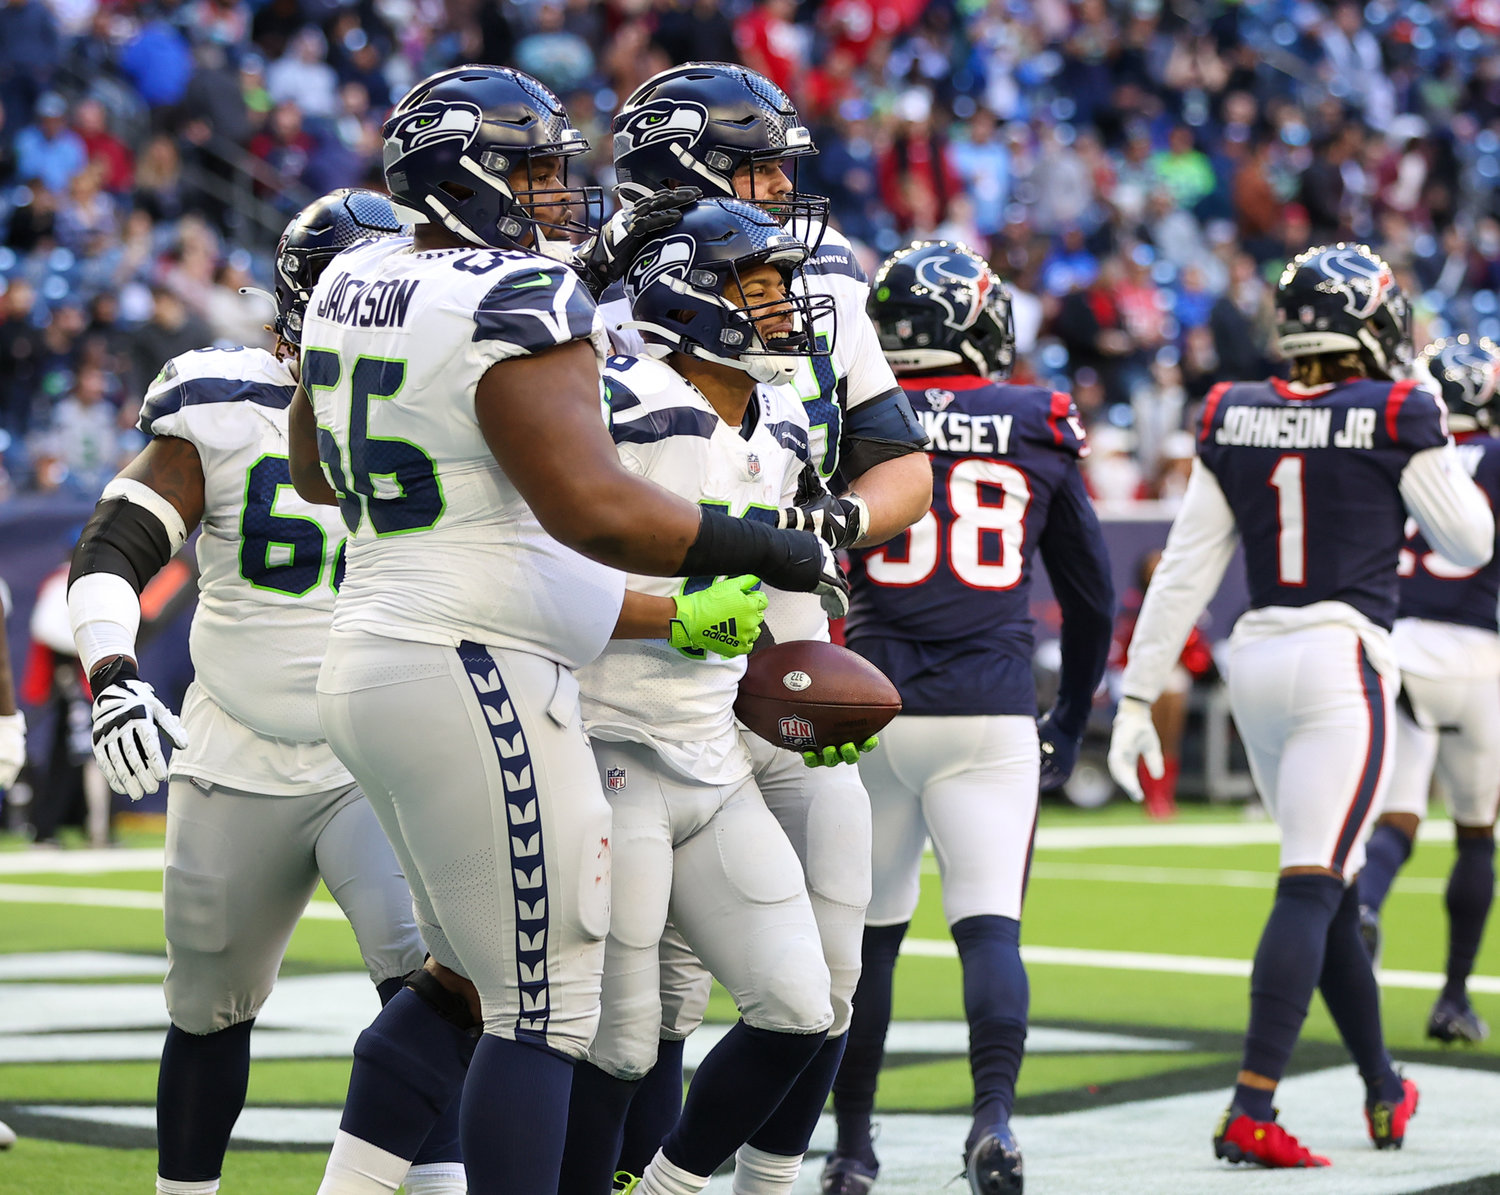 Teammates congratulate Seattle Seahawks wide receiver Tyler Lockett (16) after a two-point conversion during the second half of an NFL game between the Seahawks and the Texans on December 12, 2021 in Houston, Texas.